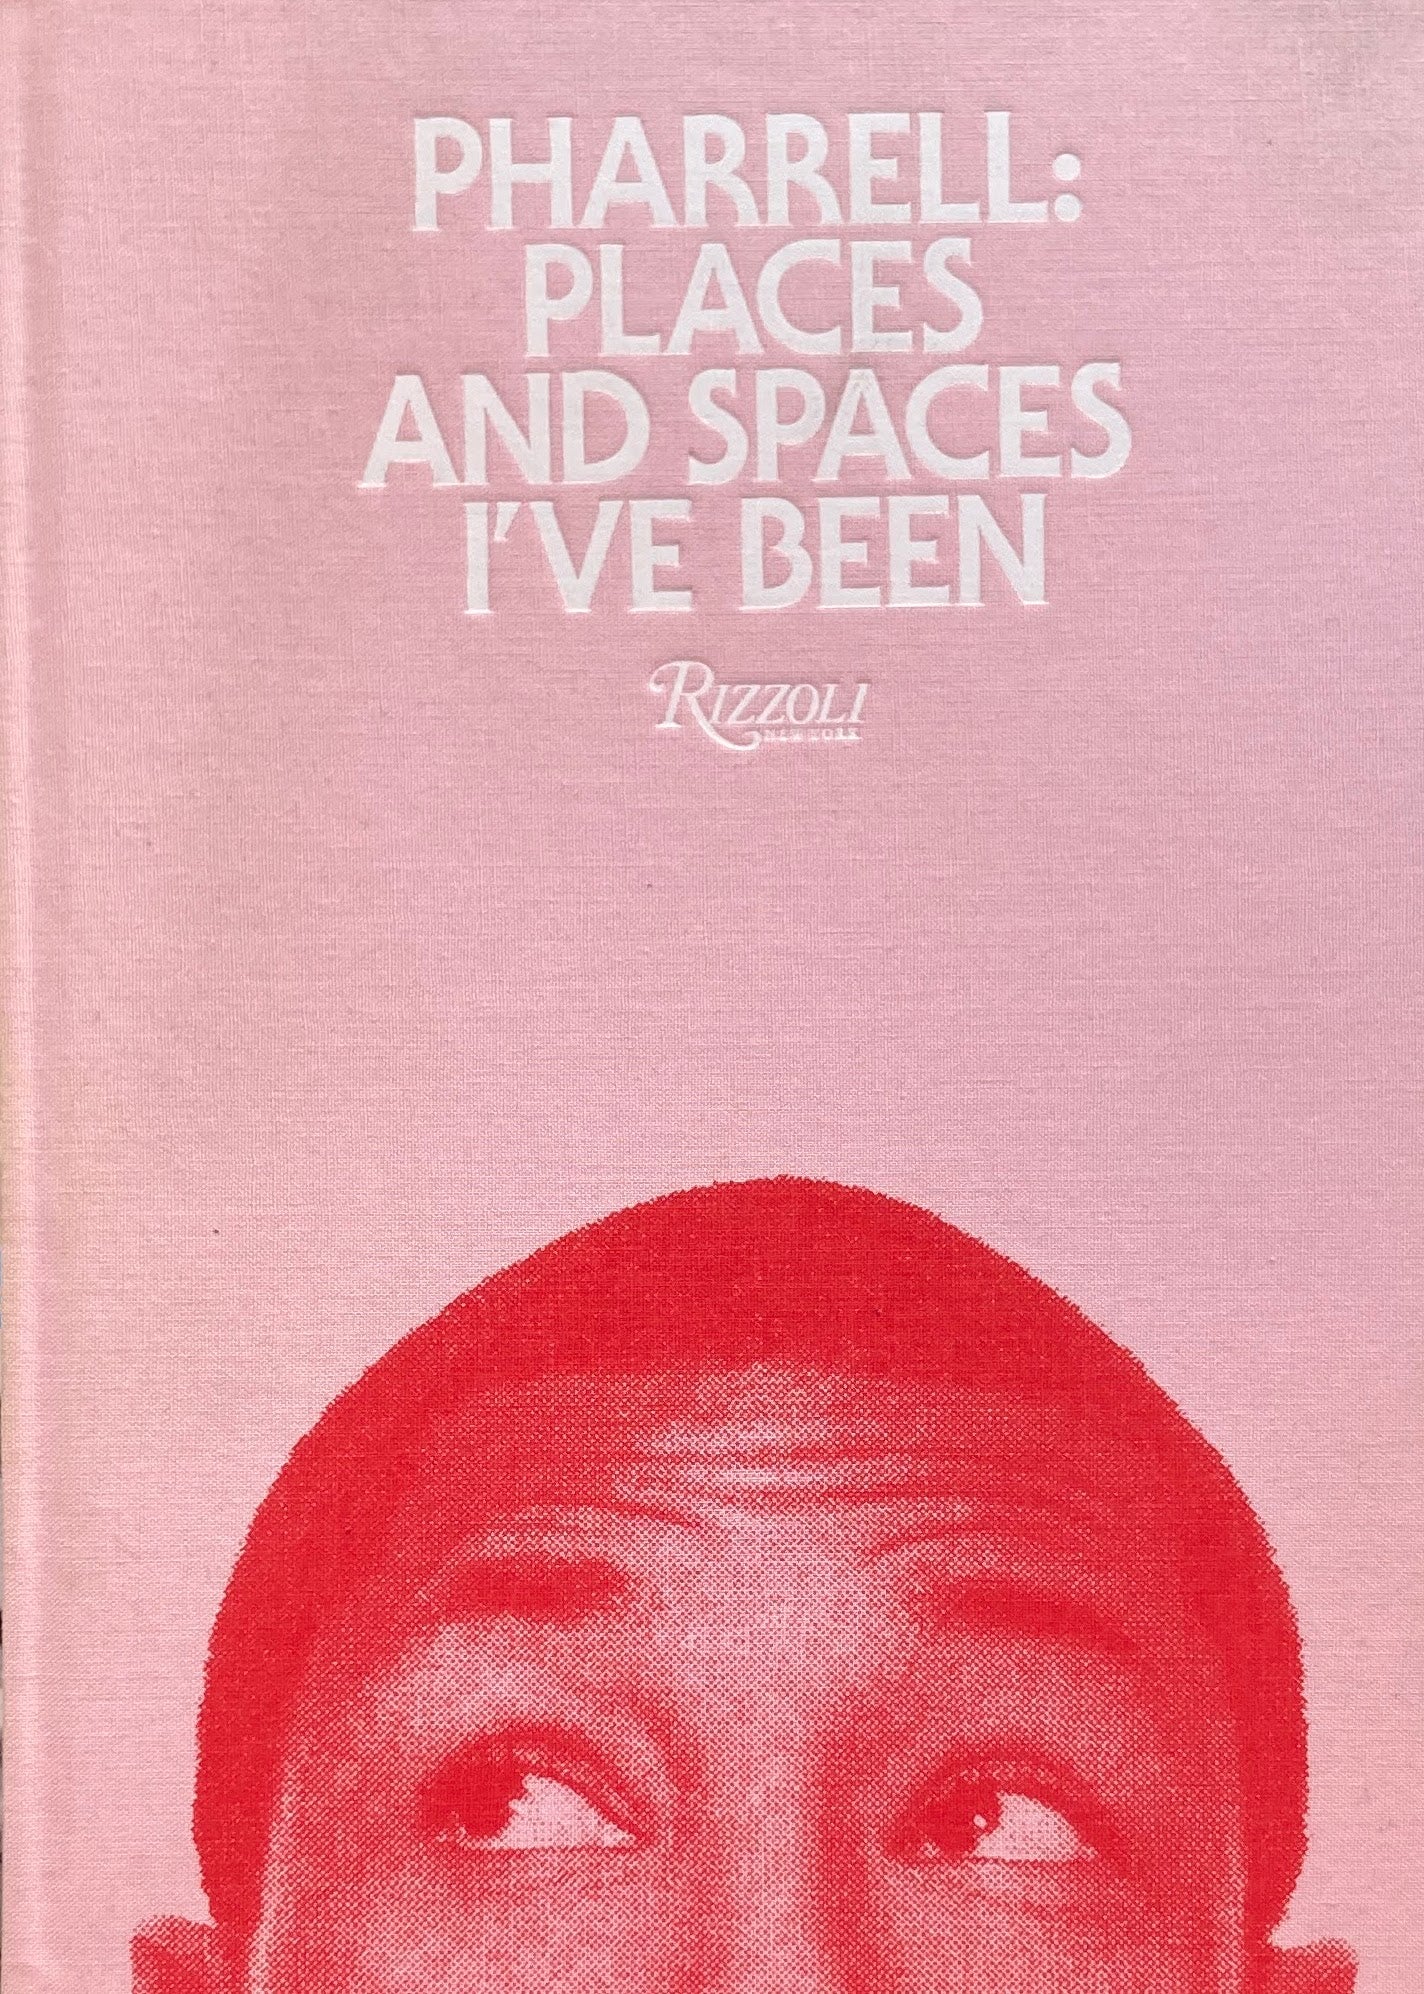 PHARRELL PLACES AND SPACES I'VE BEEN